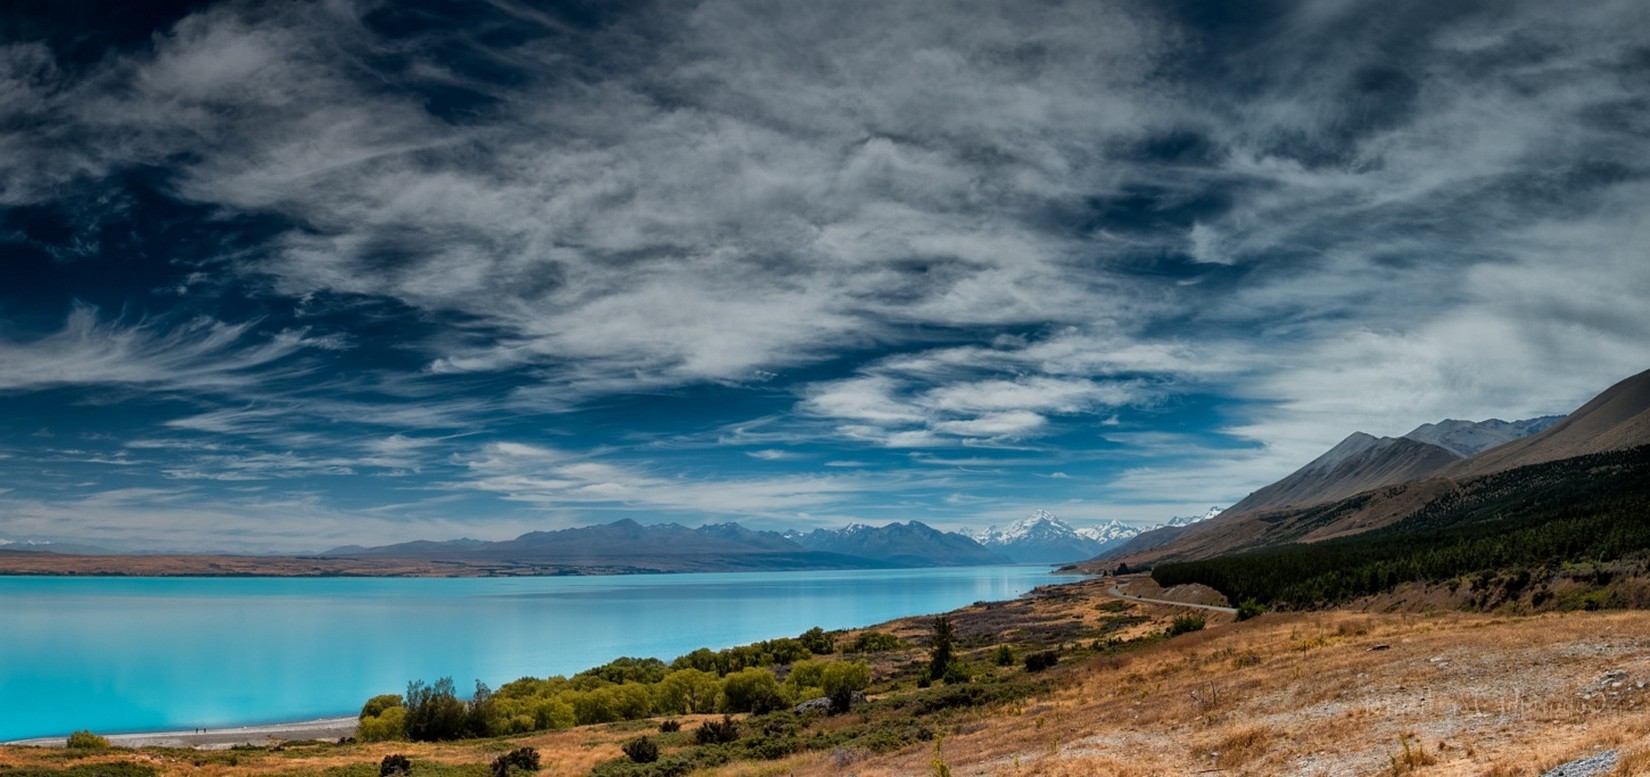 lake, Road, Clouds, Mountain, Snowy Peak, Turquoise, Nature, Landscape Wallpaper